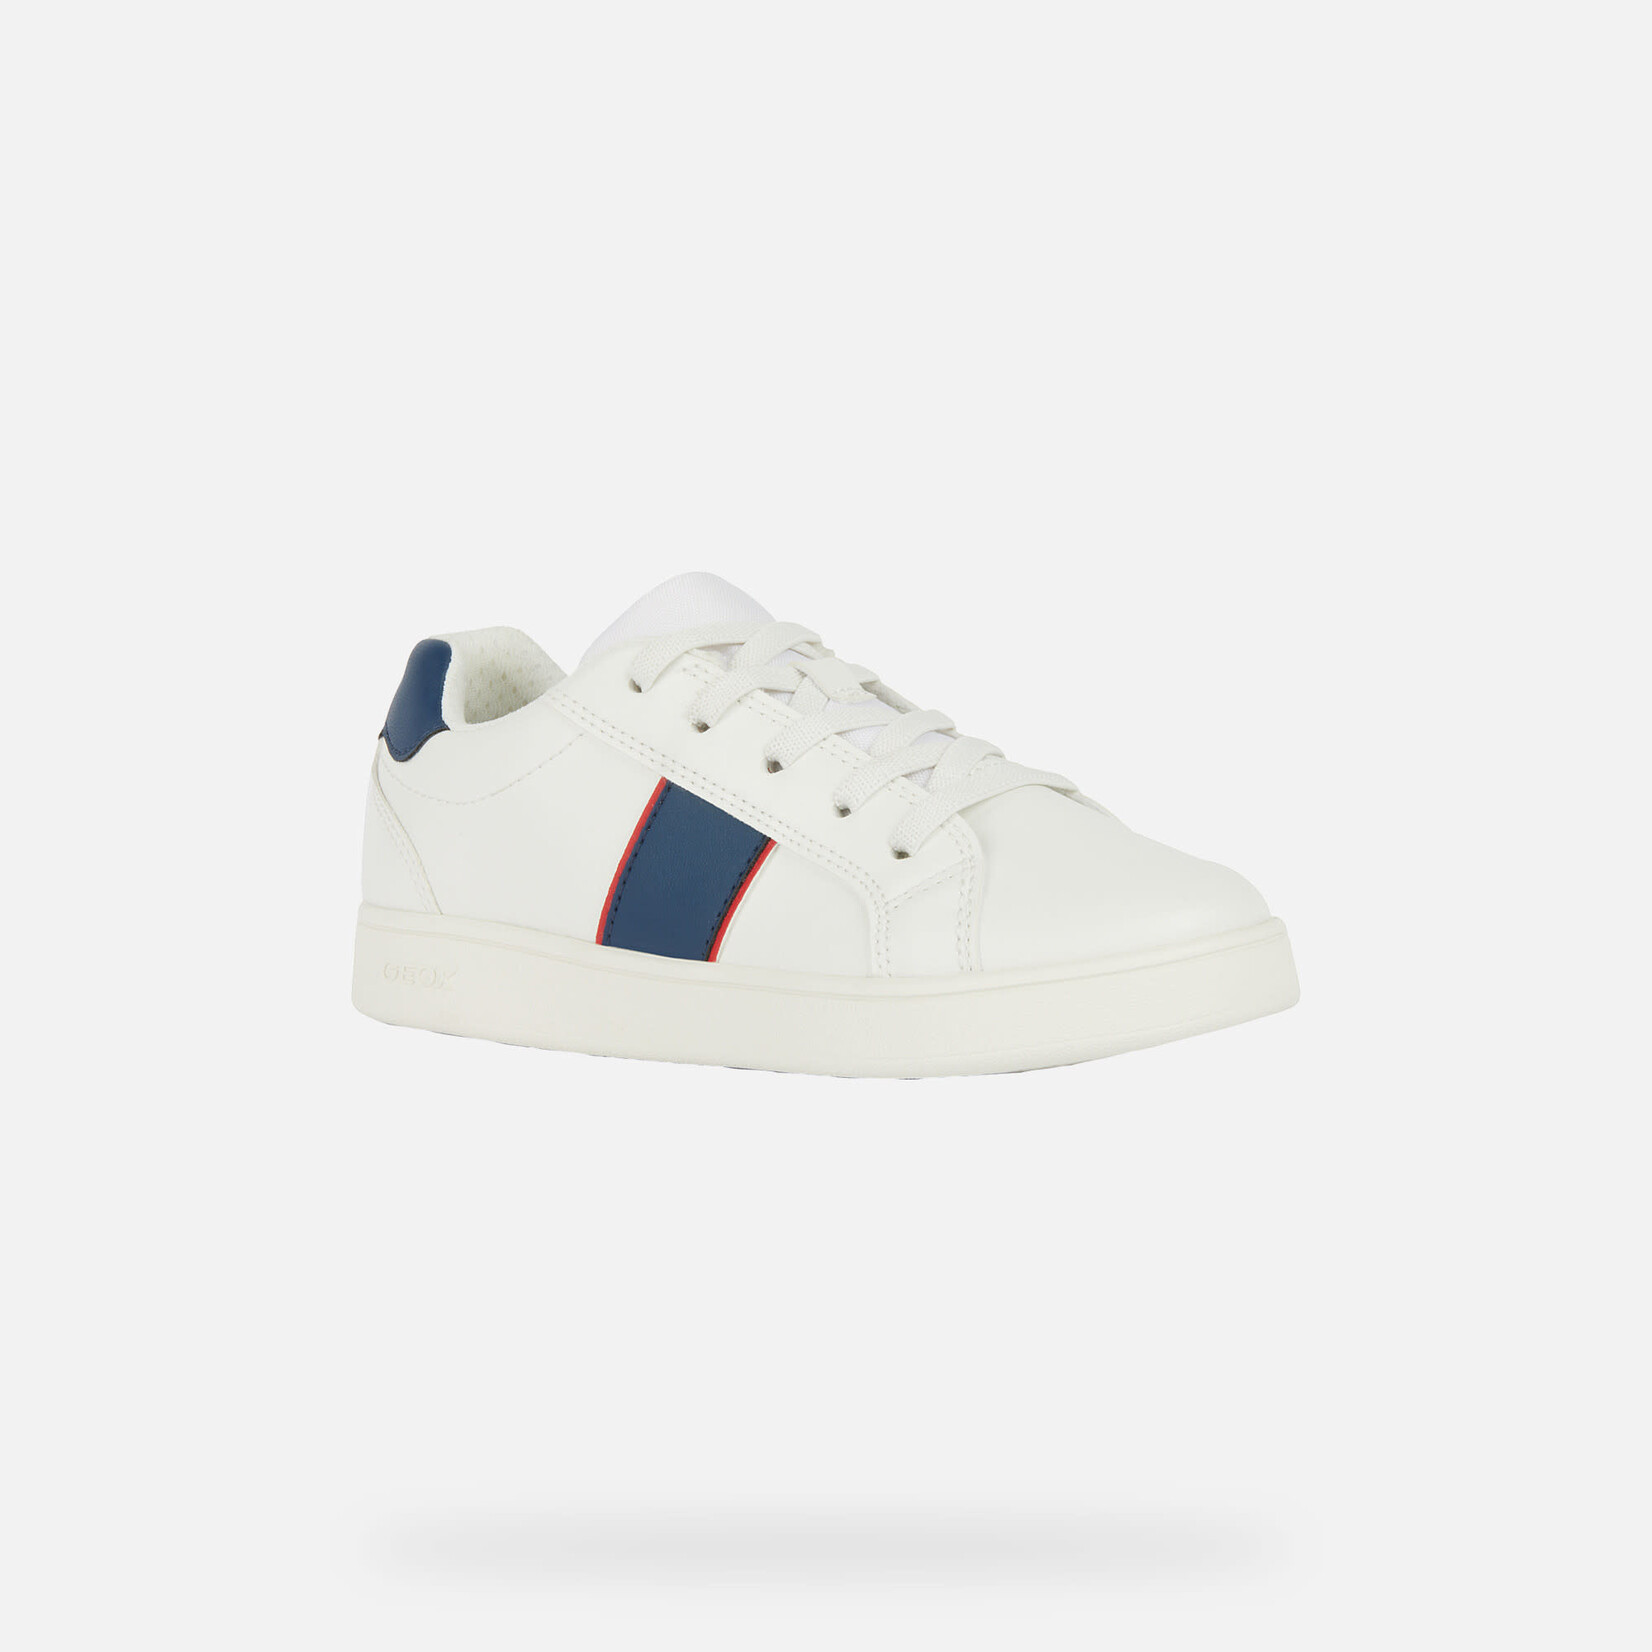 Geox GEOX - White synthetic leather sneakers 'Eclyper - White/Navy'